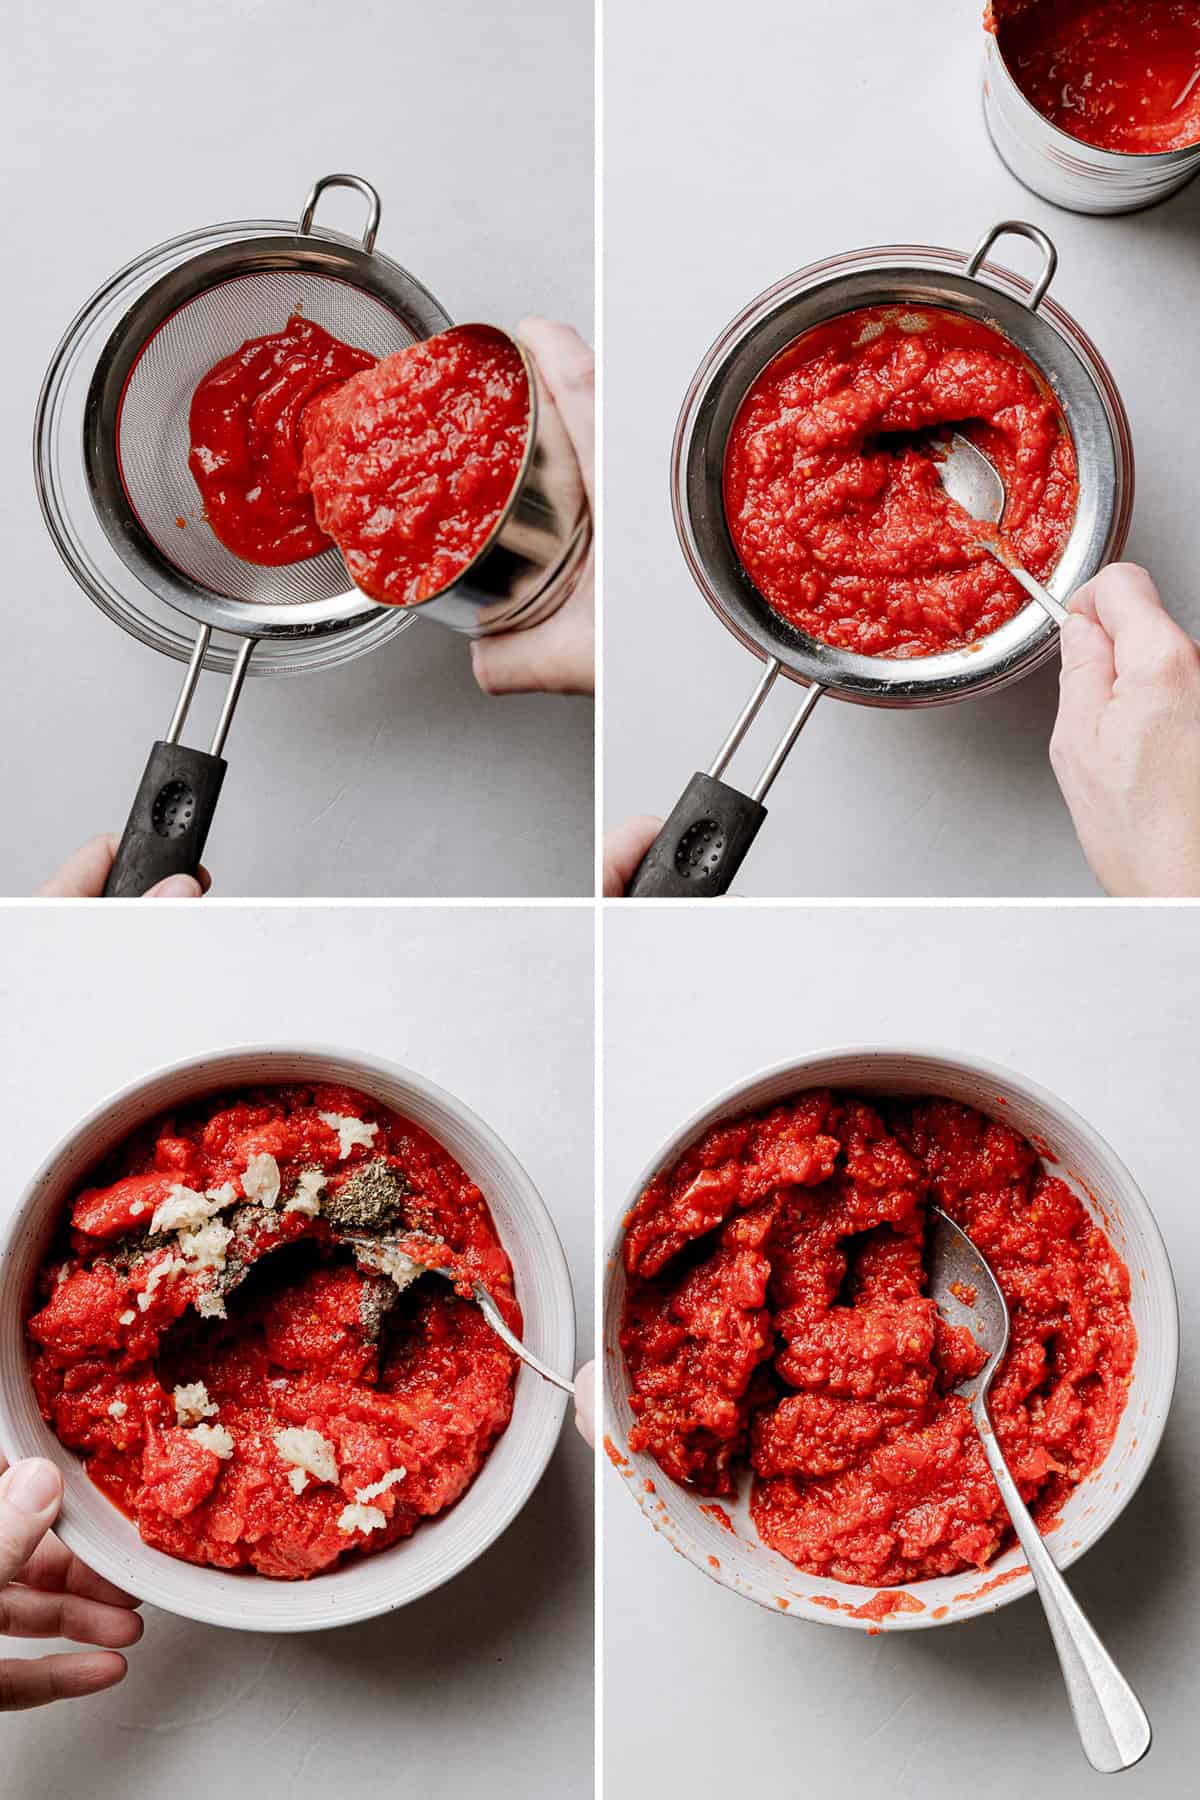 Images showing tomatoes strained in mesh strainer, spoon pushing out liquid, spices stirred into the crushed tomatoes.